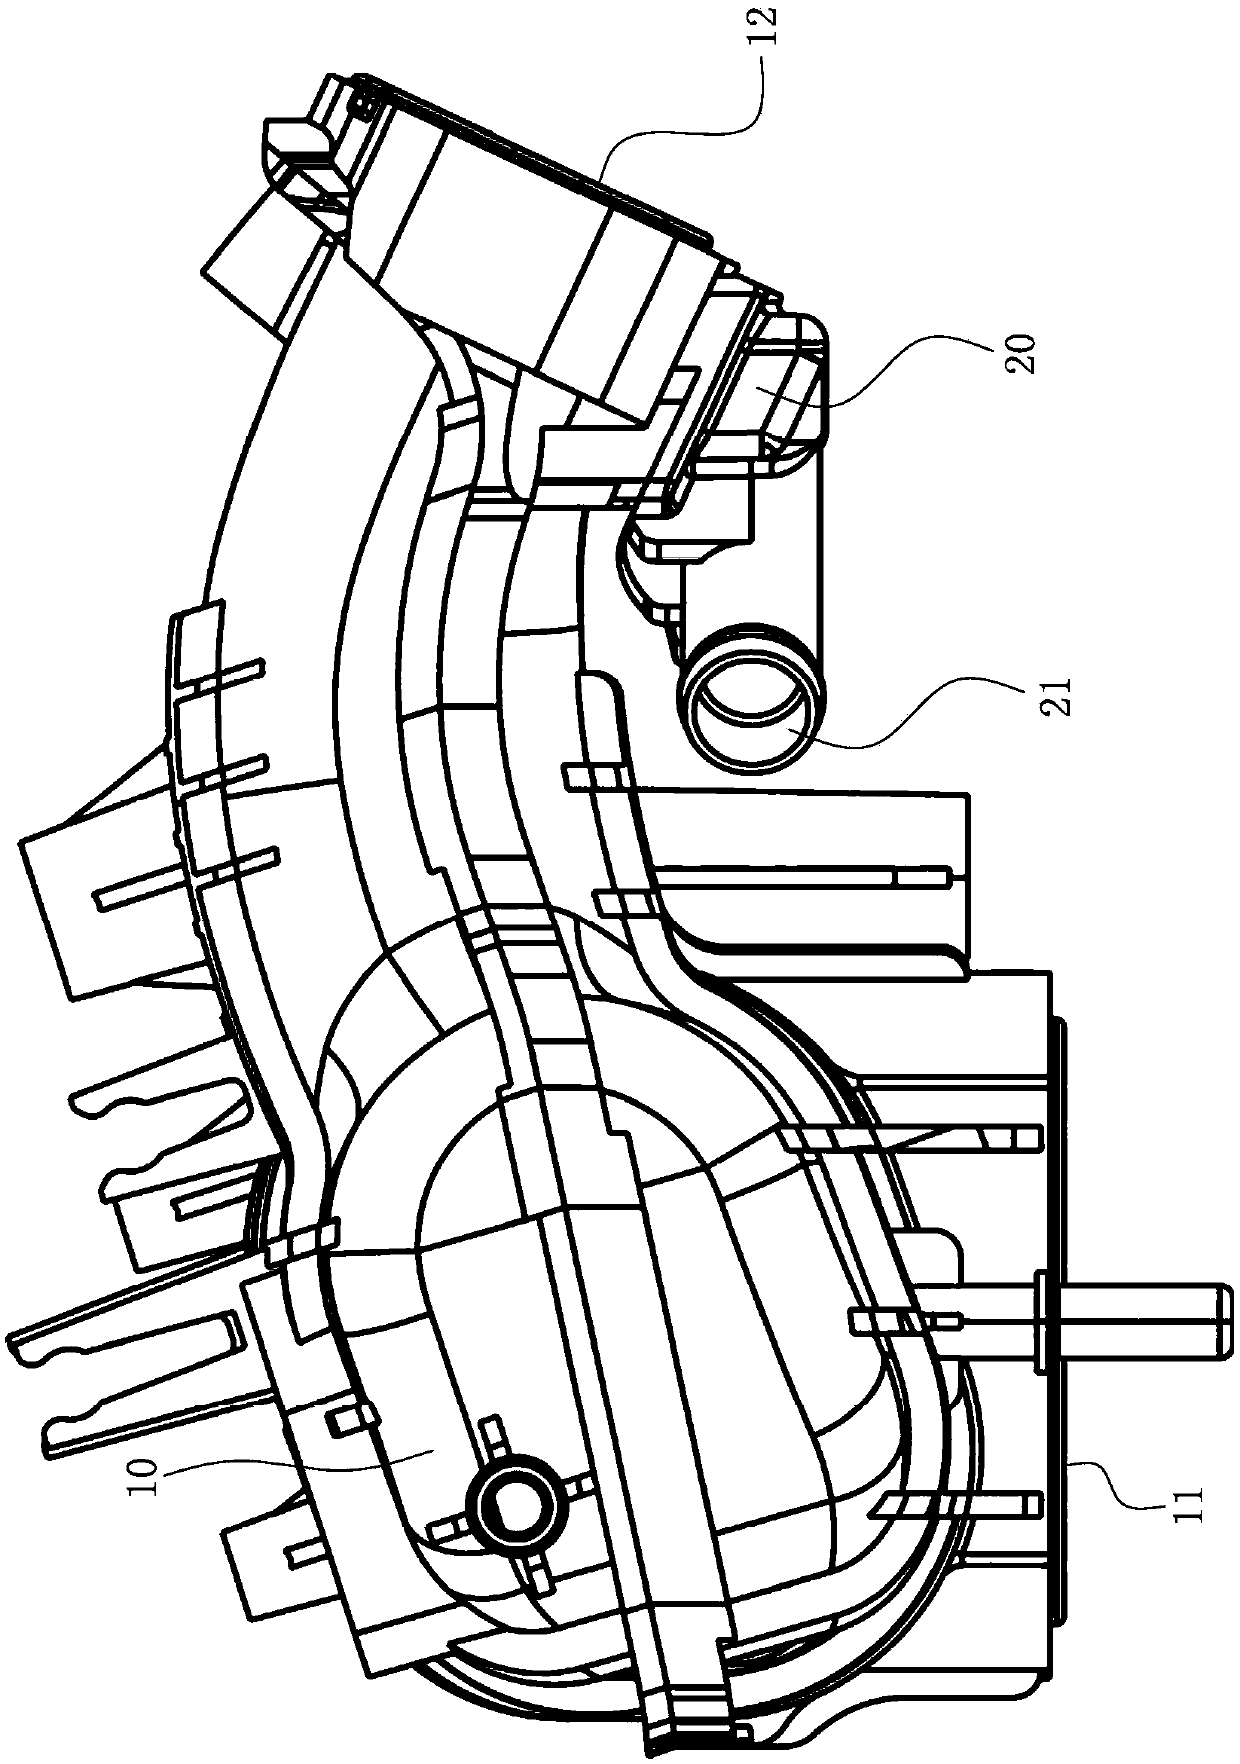 Intake manifold that directs crankcase ventilation gases